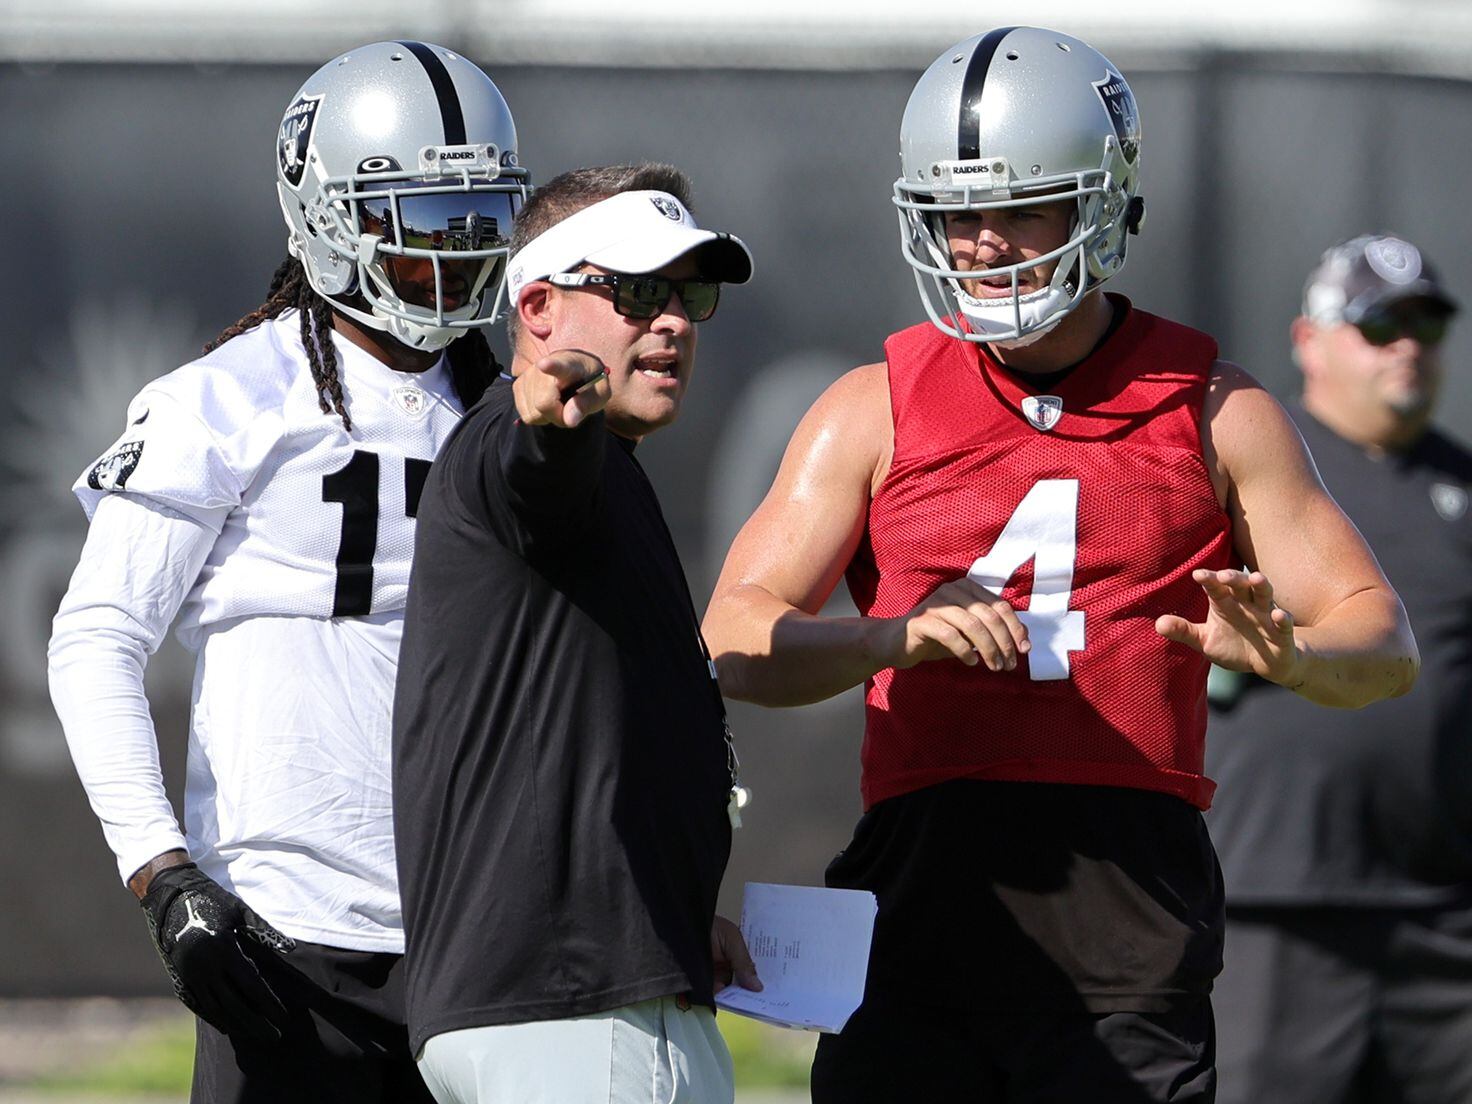 Davante Adams' compares Derek Carr to Aaron Rodgers. Is Carr a